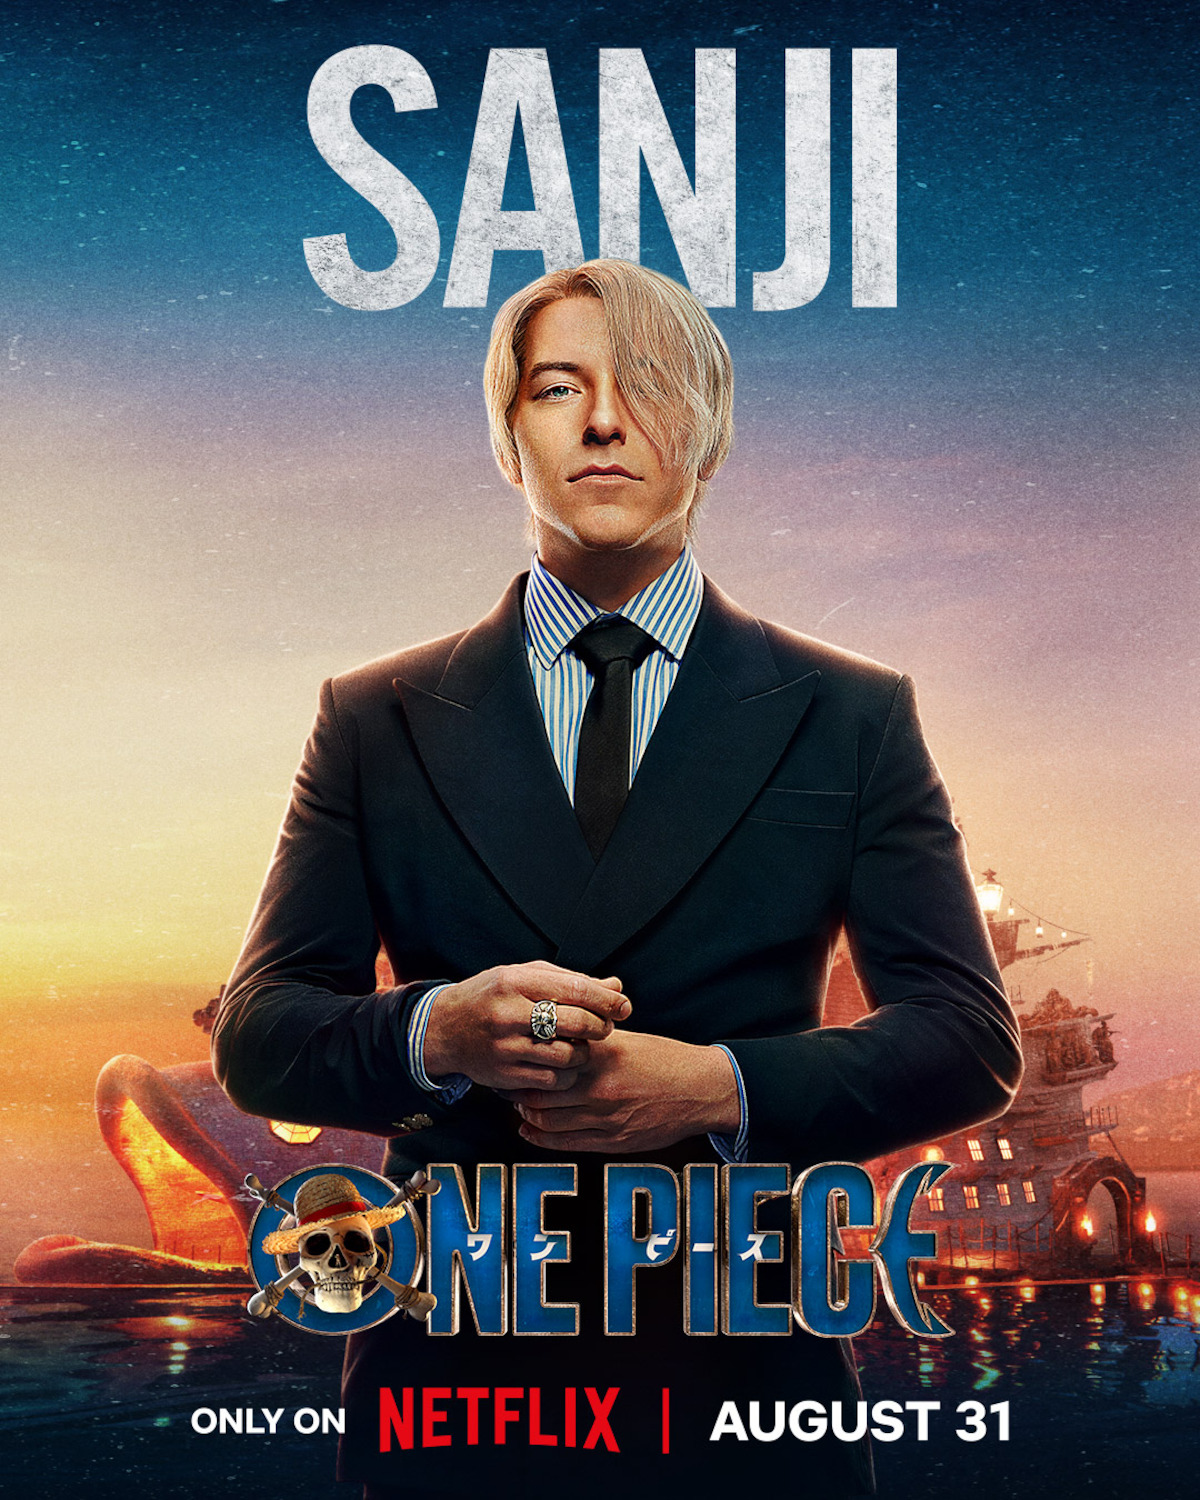 Who plays Sanji in Netflix's One Piece live action series?